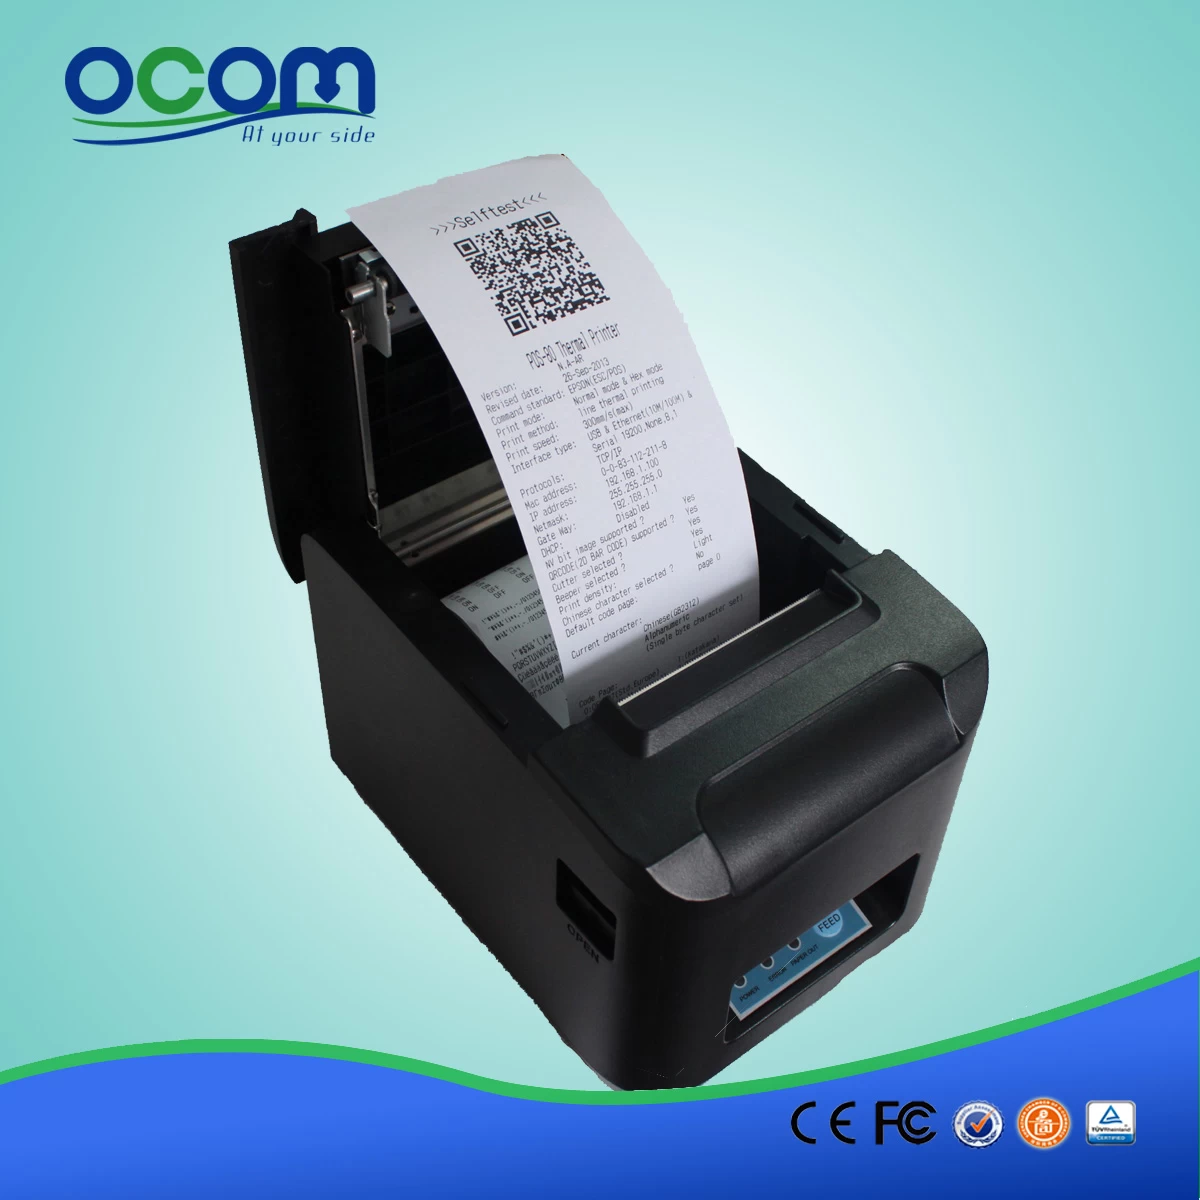 80mm Thermal Printer with High Performance